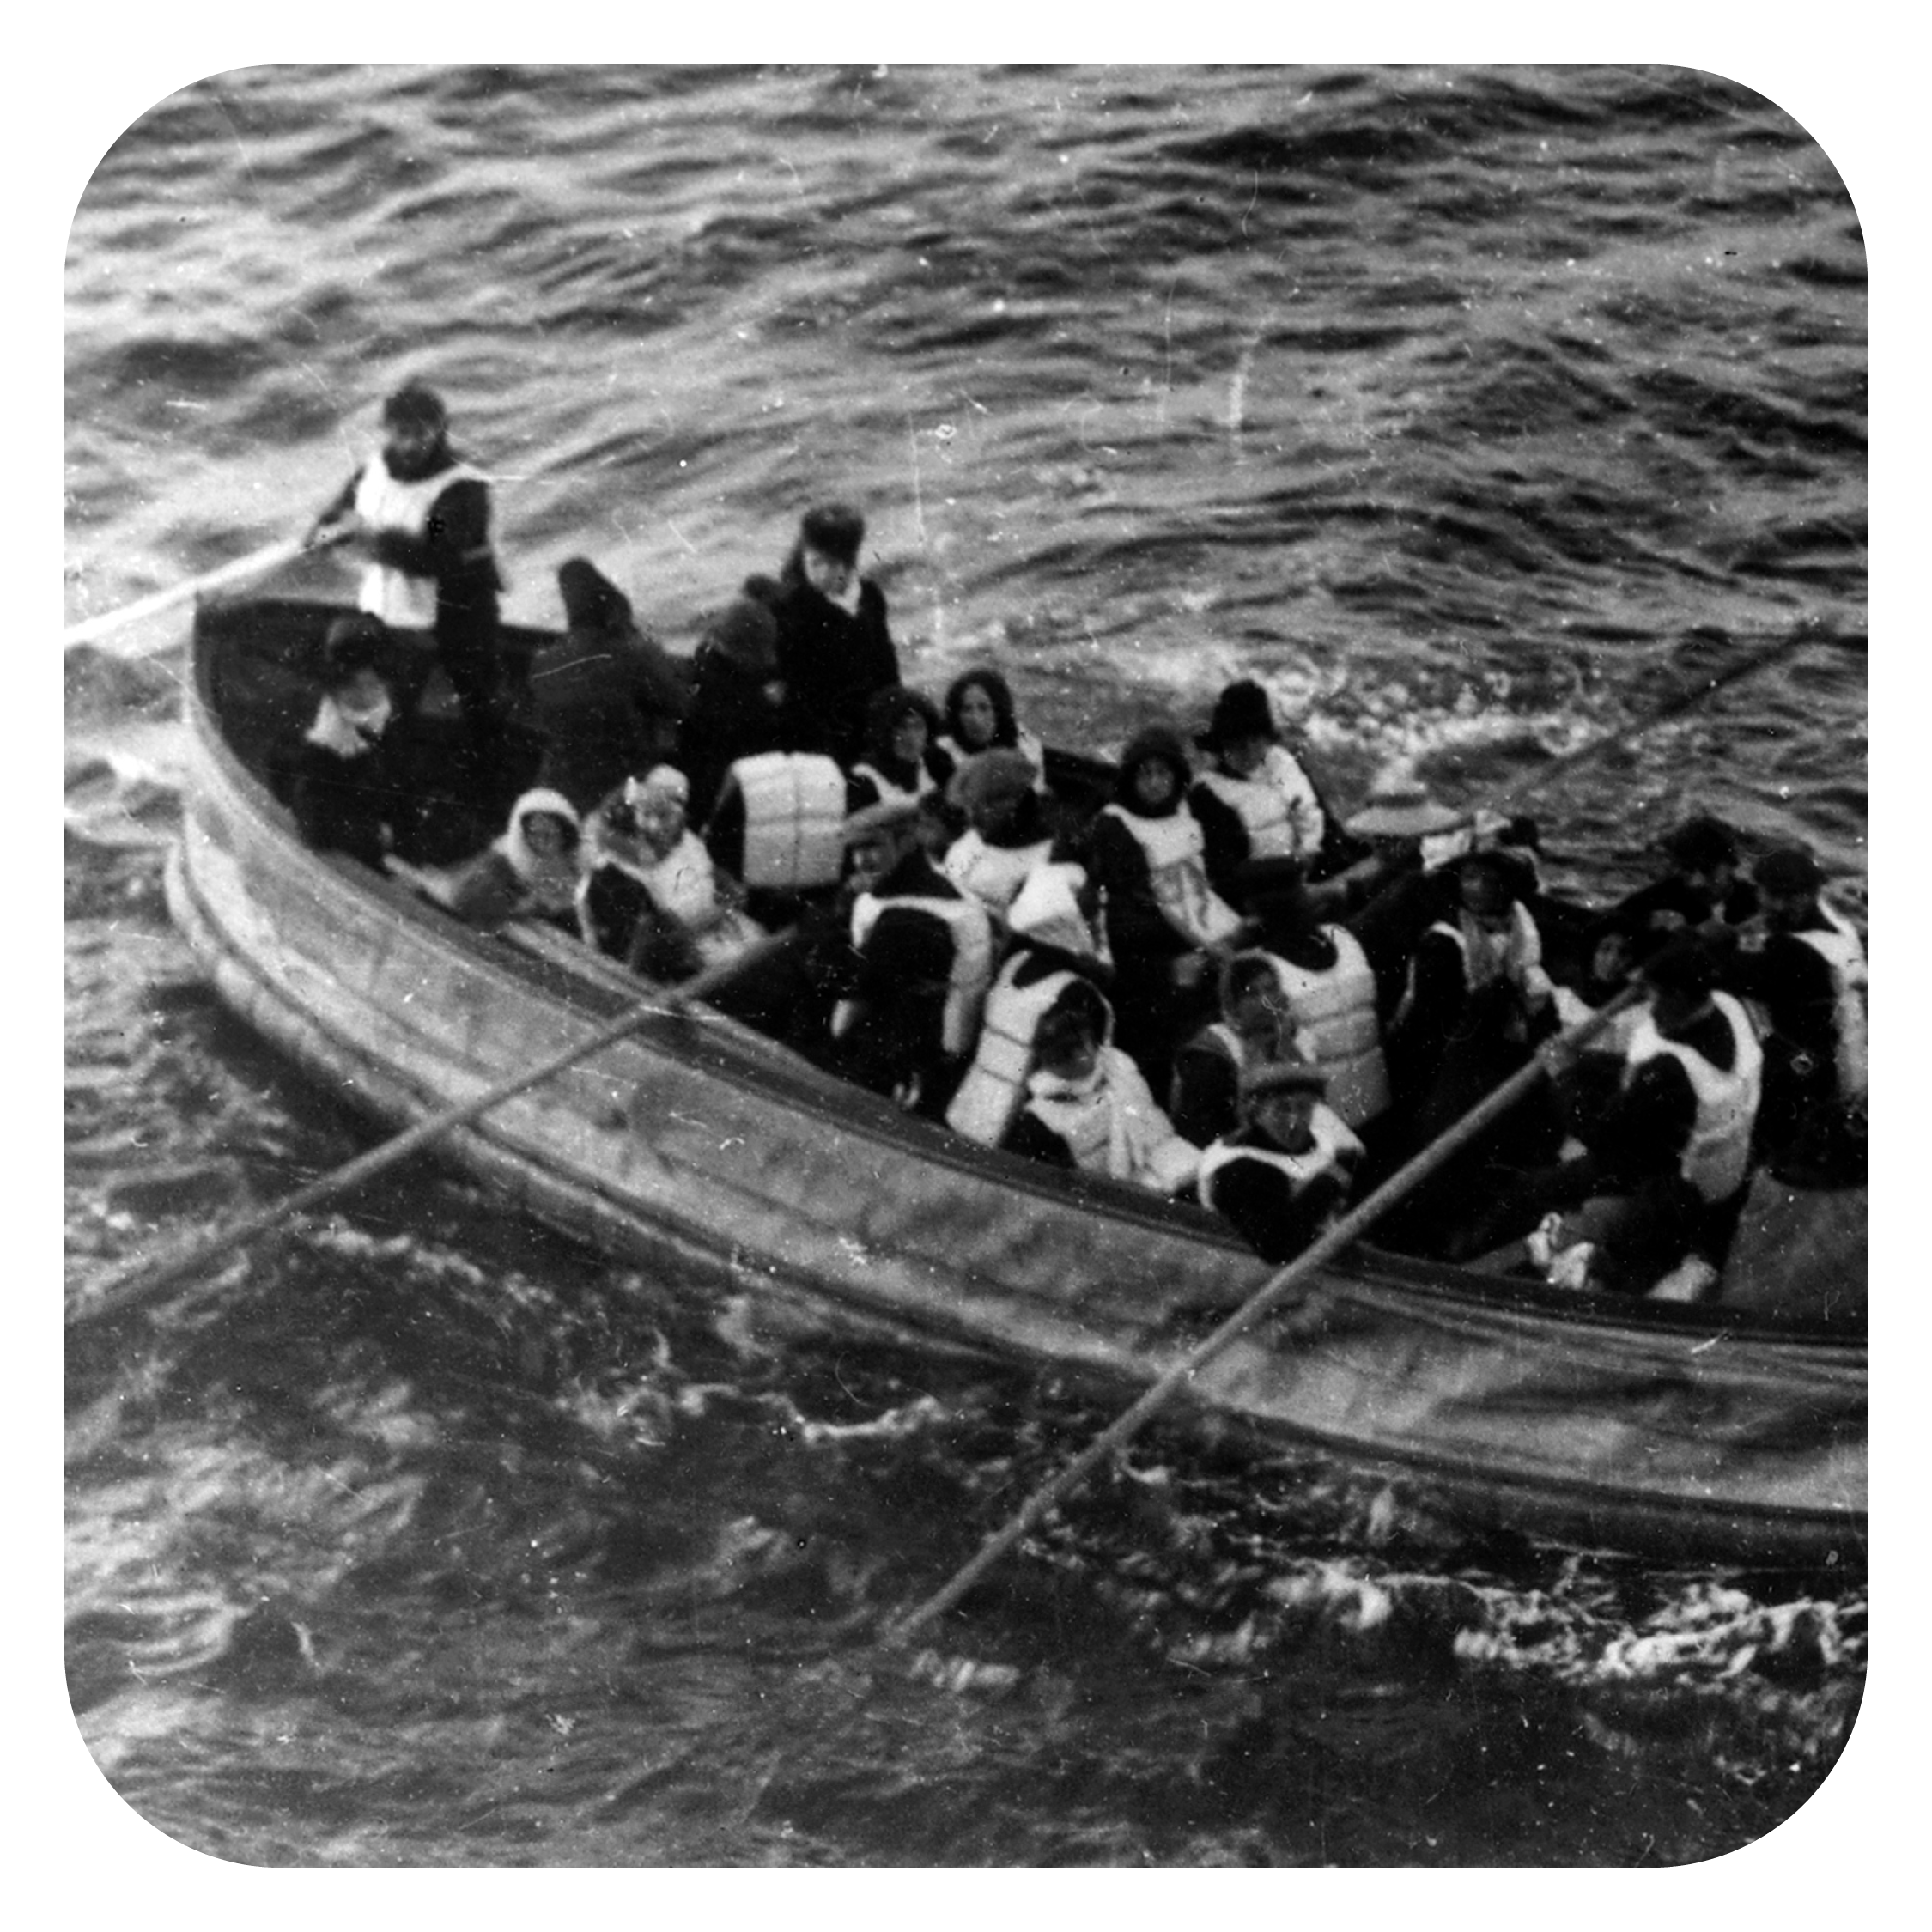 12:45 a.m. – First lifeboats are lowered 2:18 a.m. – Bow sinks 3:30 a.m. – Survivors are rescued by Carpathia.